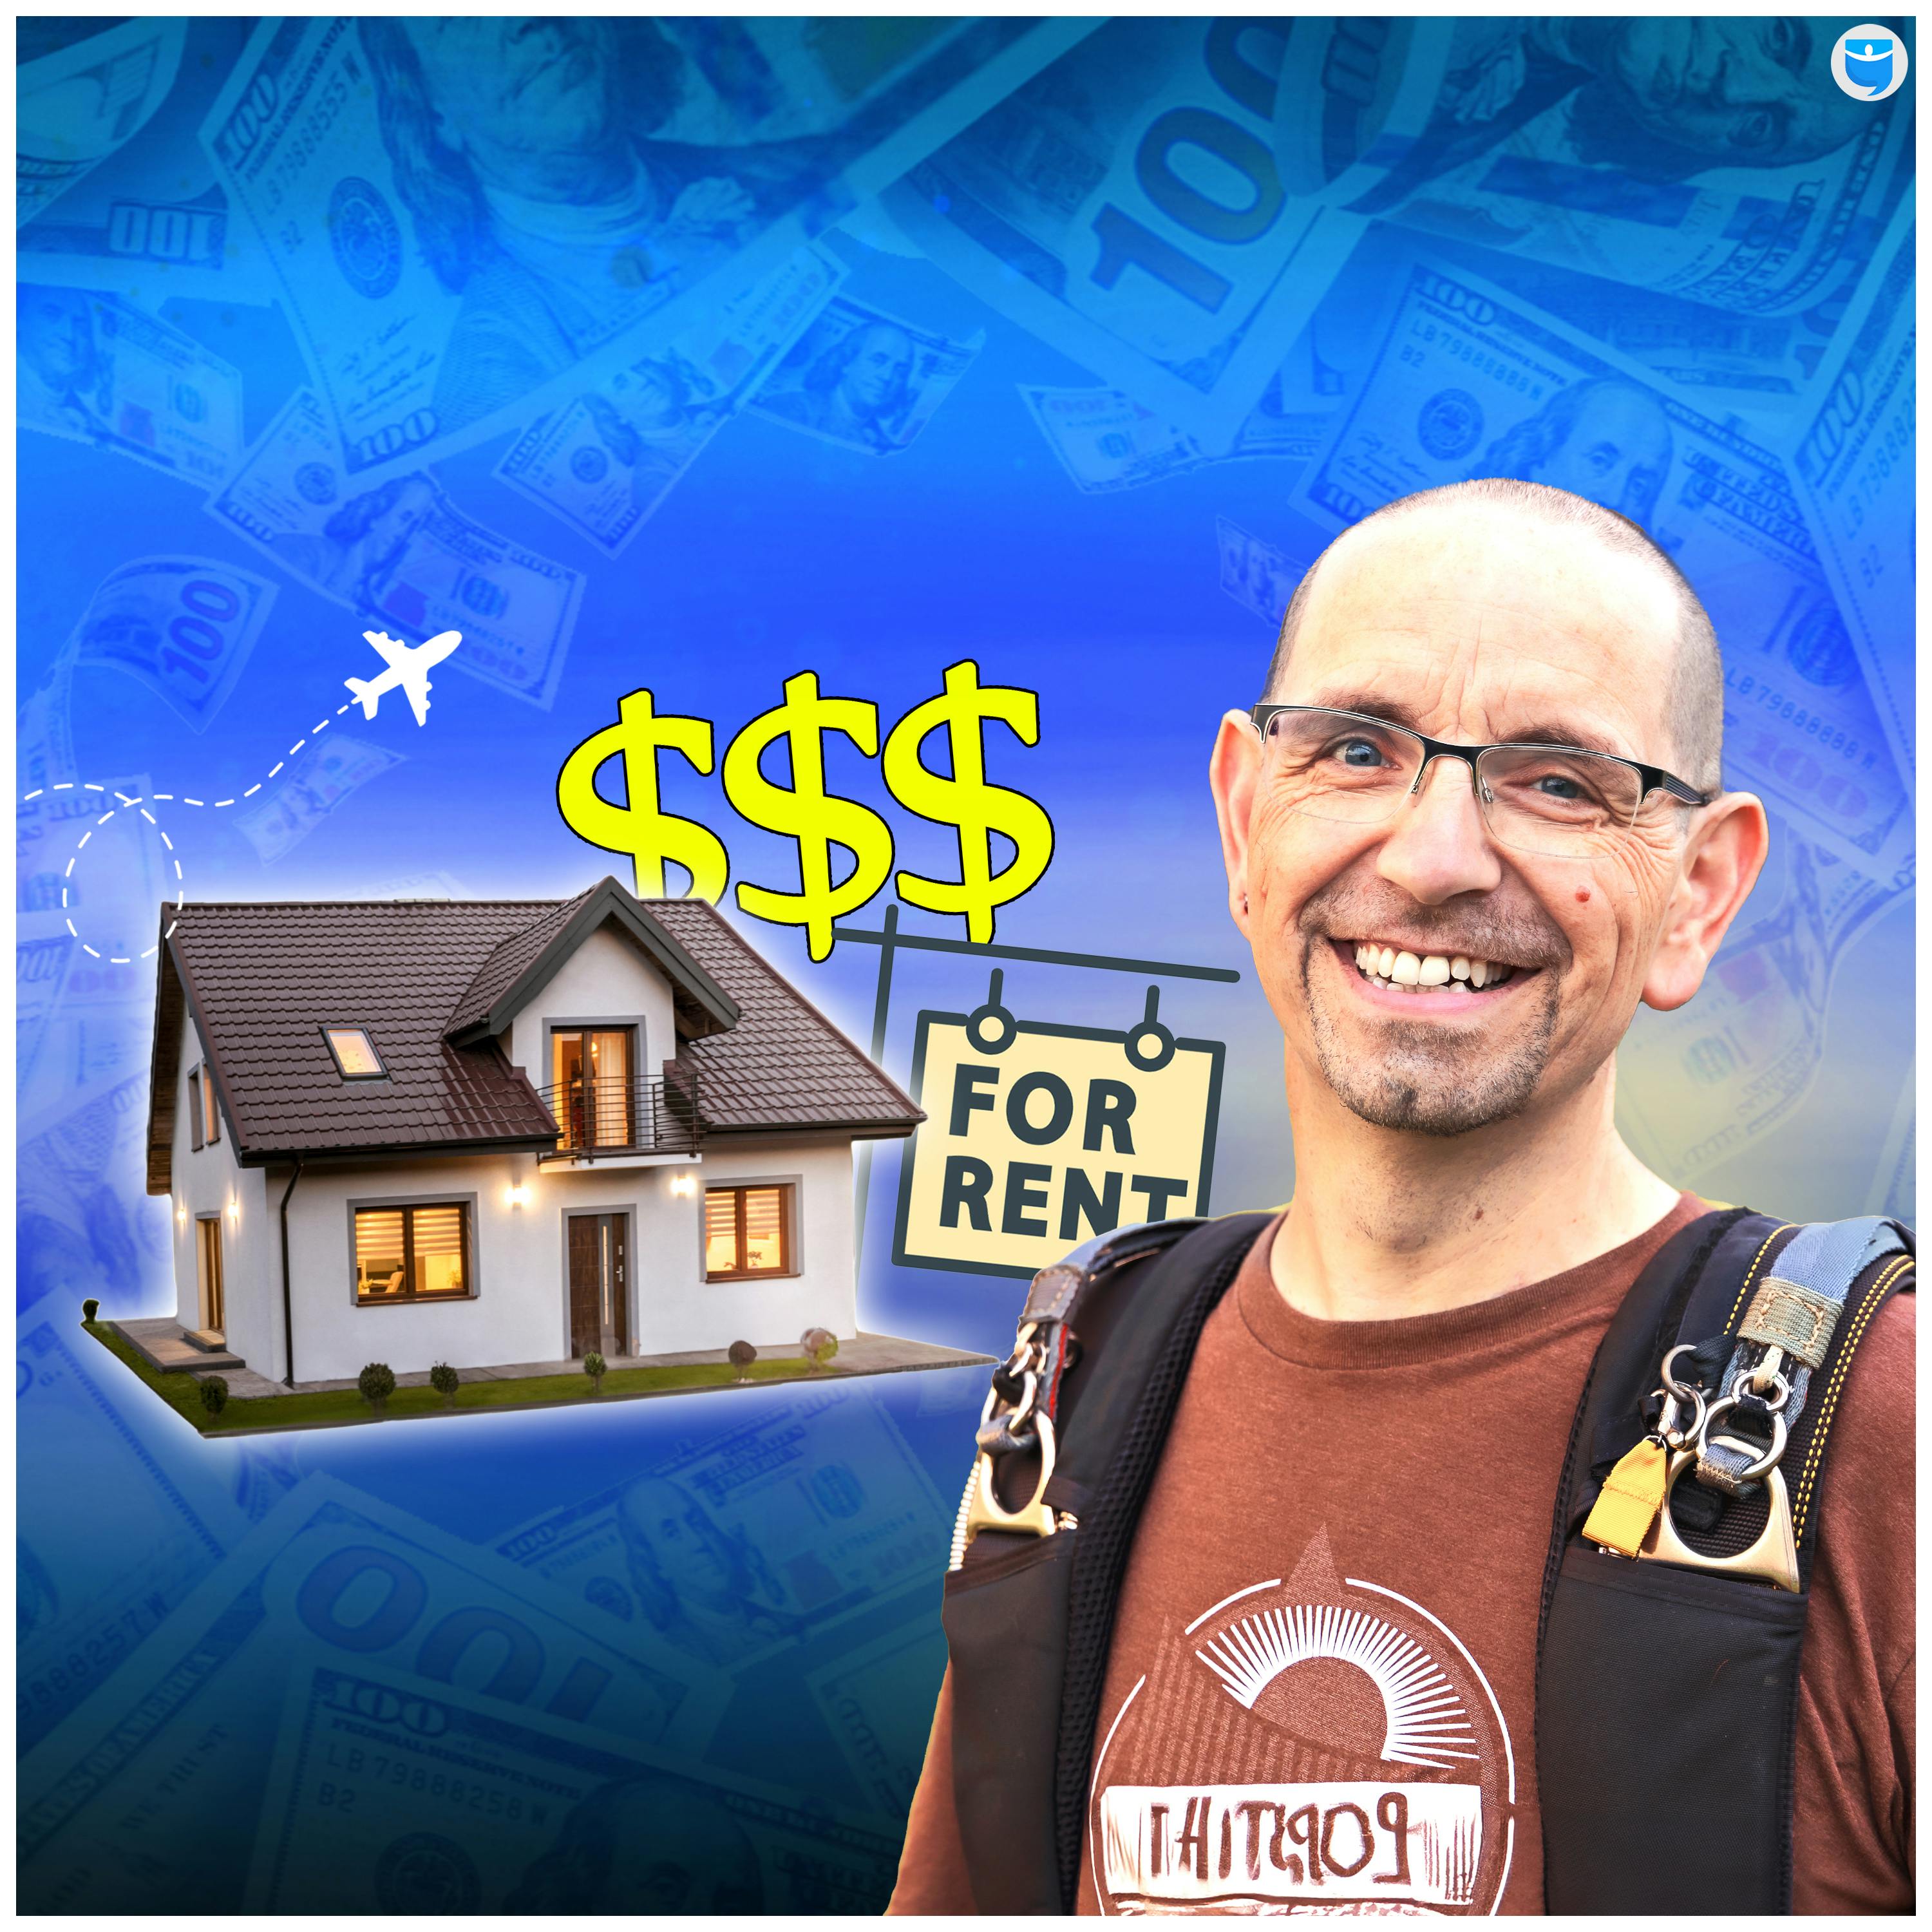 521: Full-Time FIRE and Traveling the World…All Thanks to Rentals!